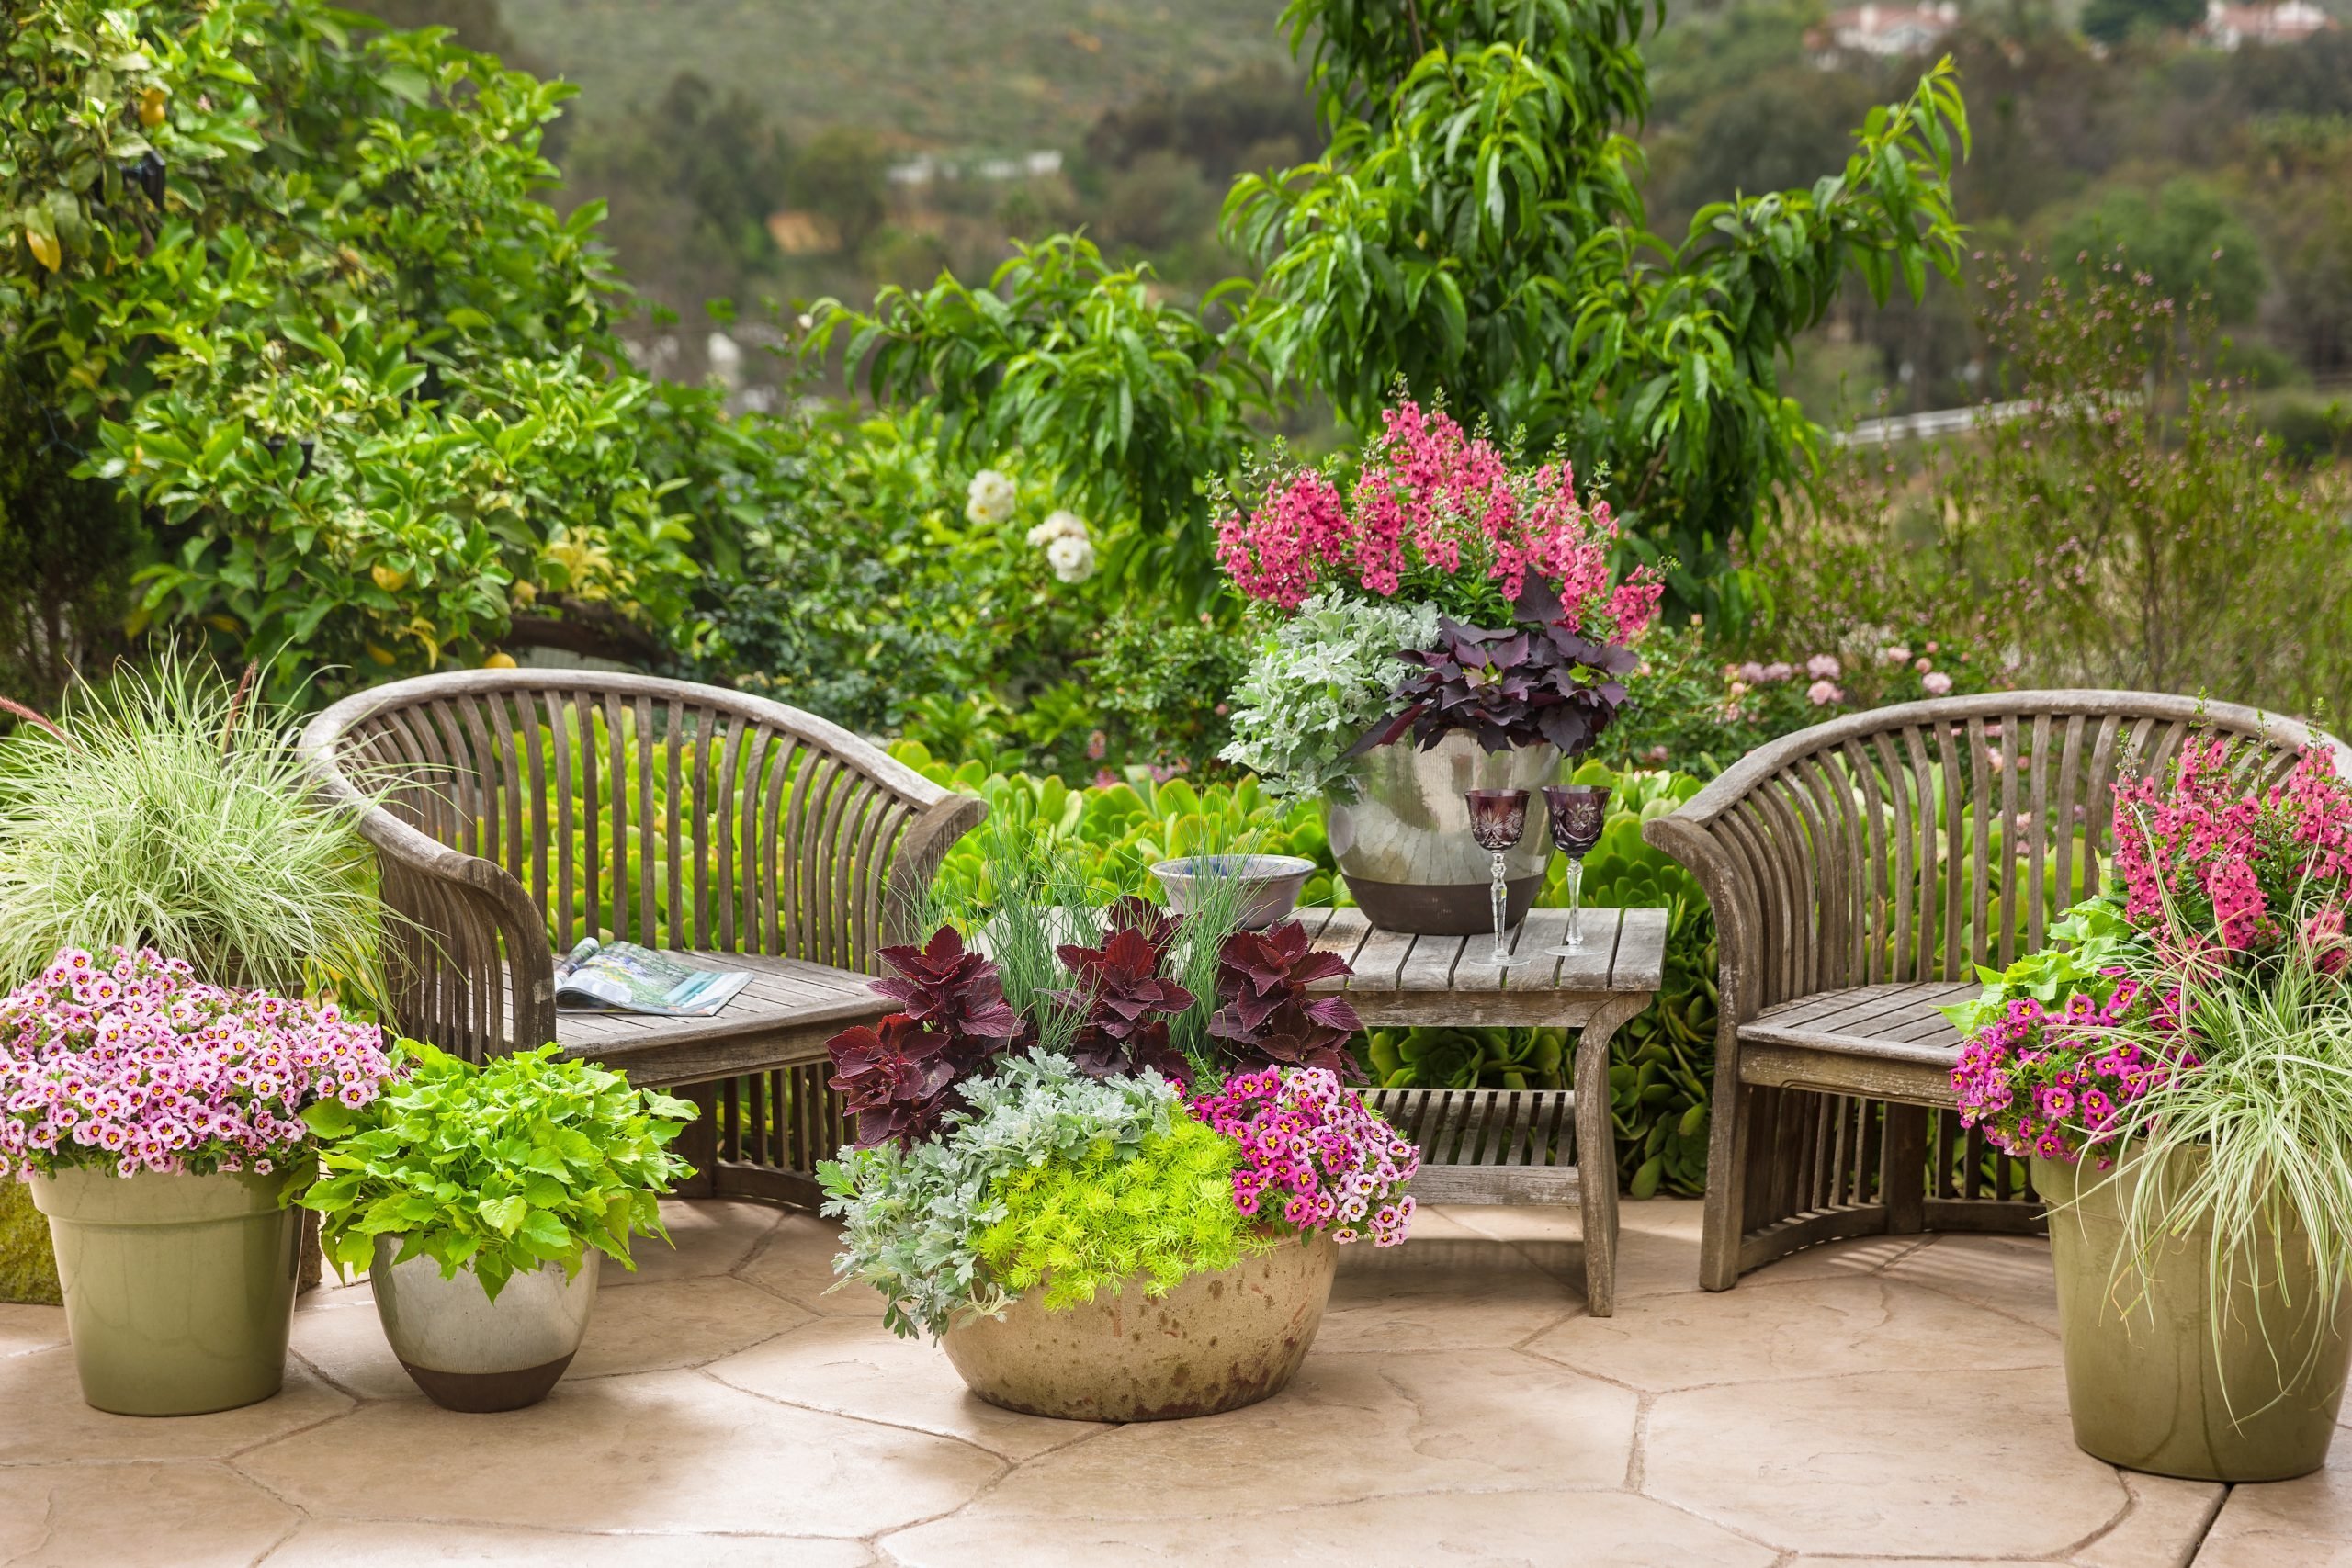 Team Hoffmann 2022 Outdoor Living Trends 4 Plants, plants and more